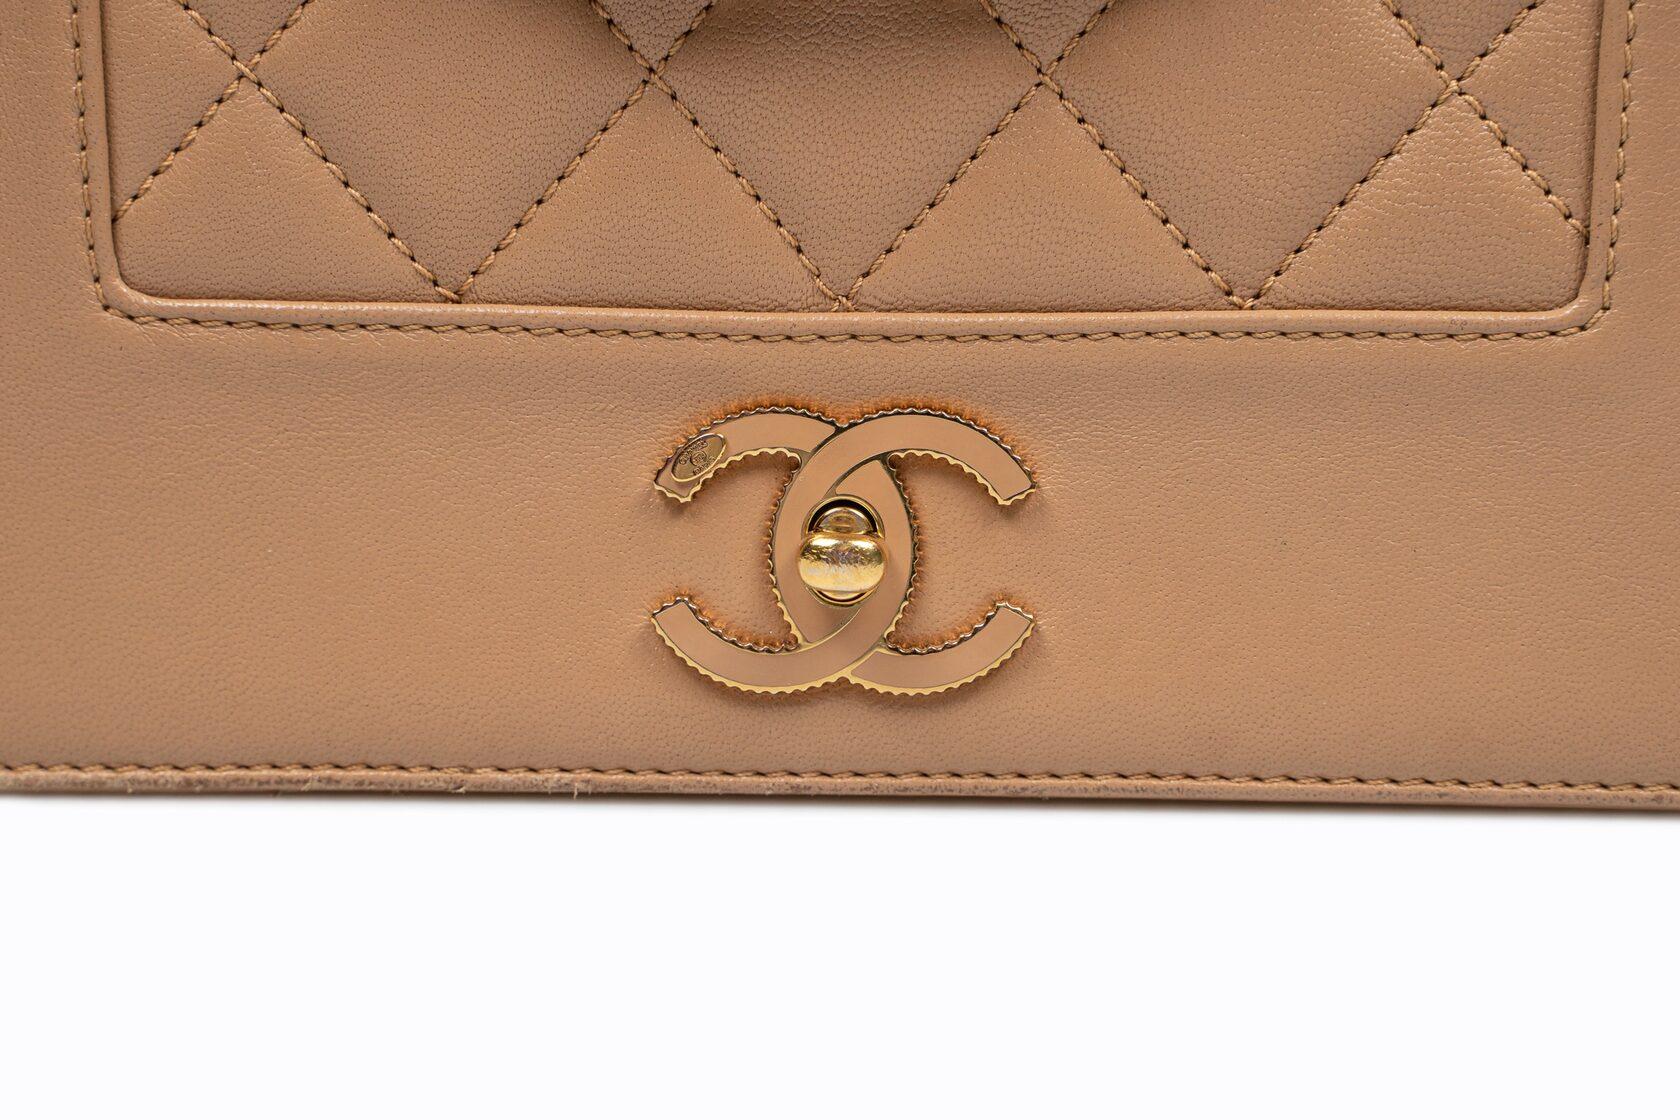 Chanel Mademoiselle Medium Flap Bag In Good Condition For Sale In Dover, DE